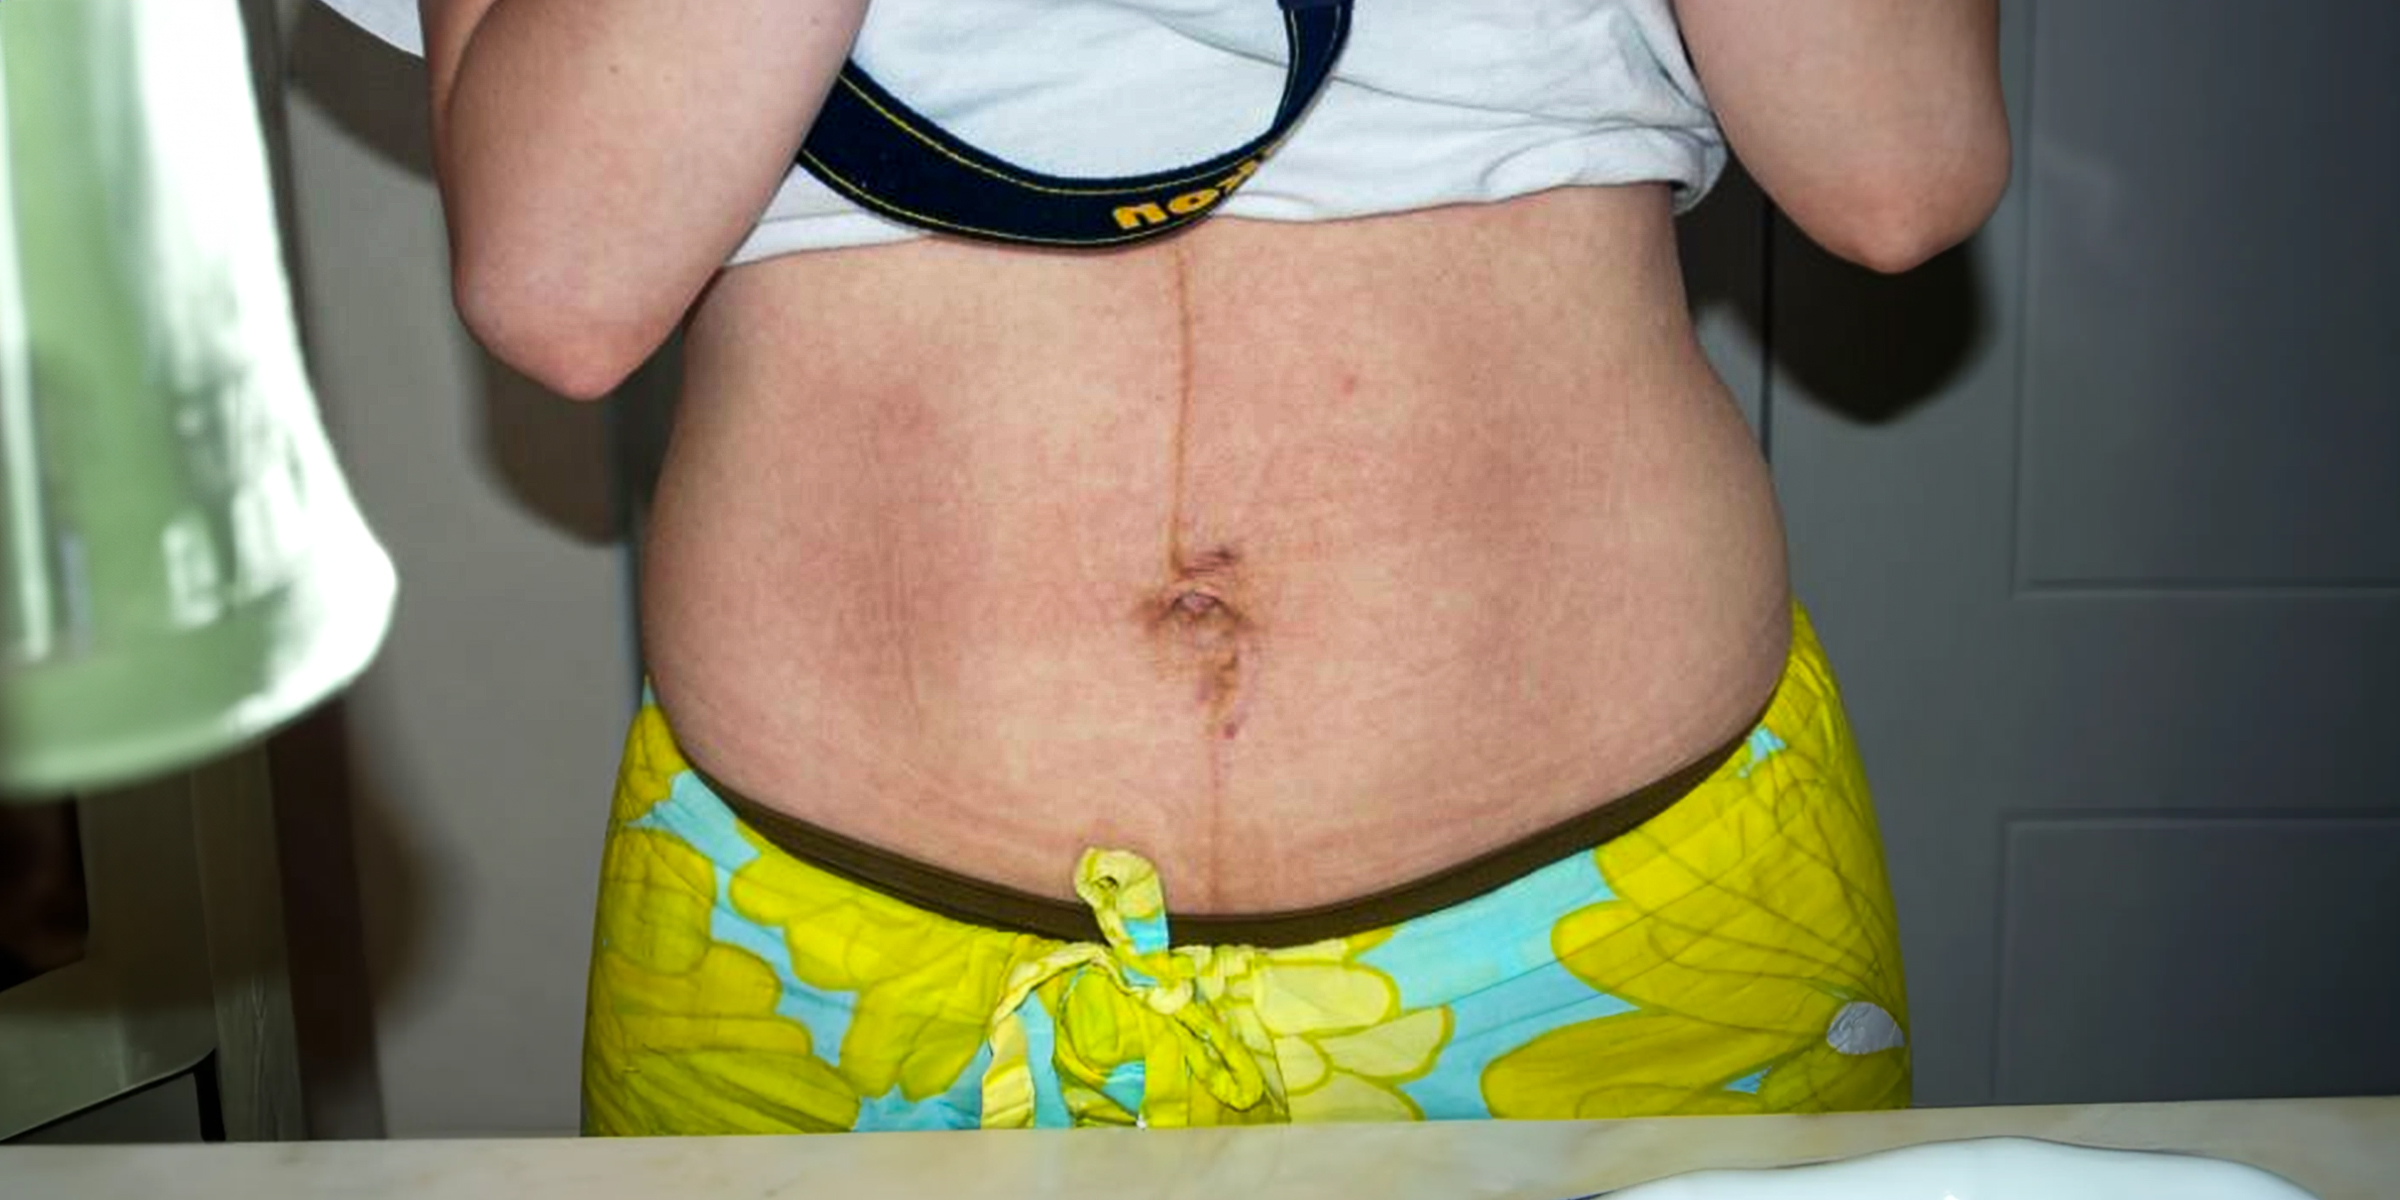 A woman's belly with stretch marks | Source: Flickr